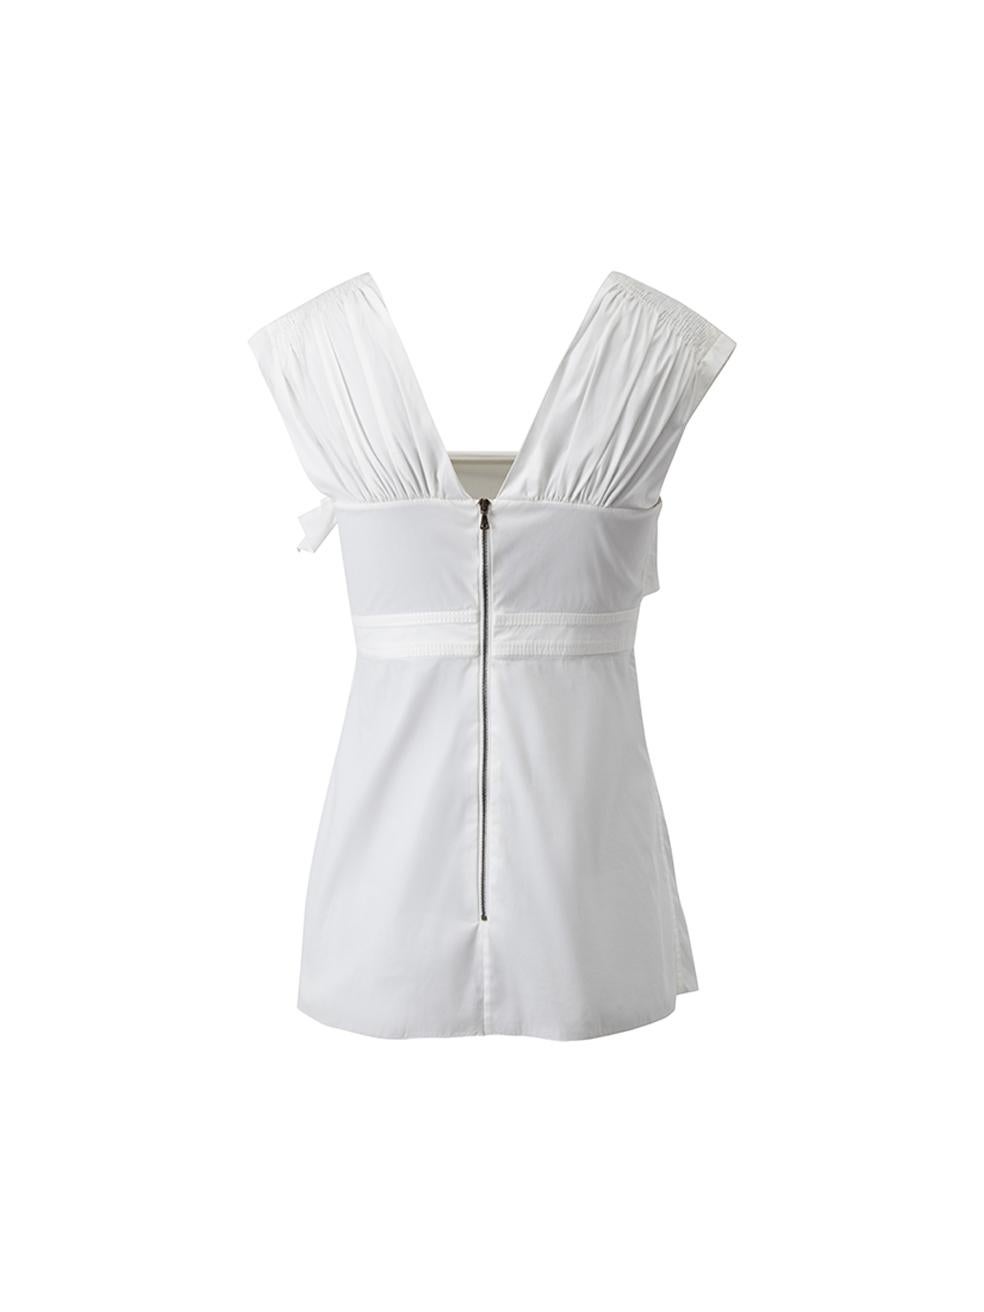 Prada Women's White Tie Accent Peplum Blouse In Excellent Condition For Sale In London, GB